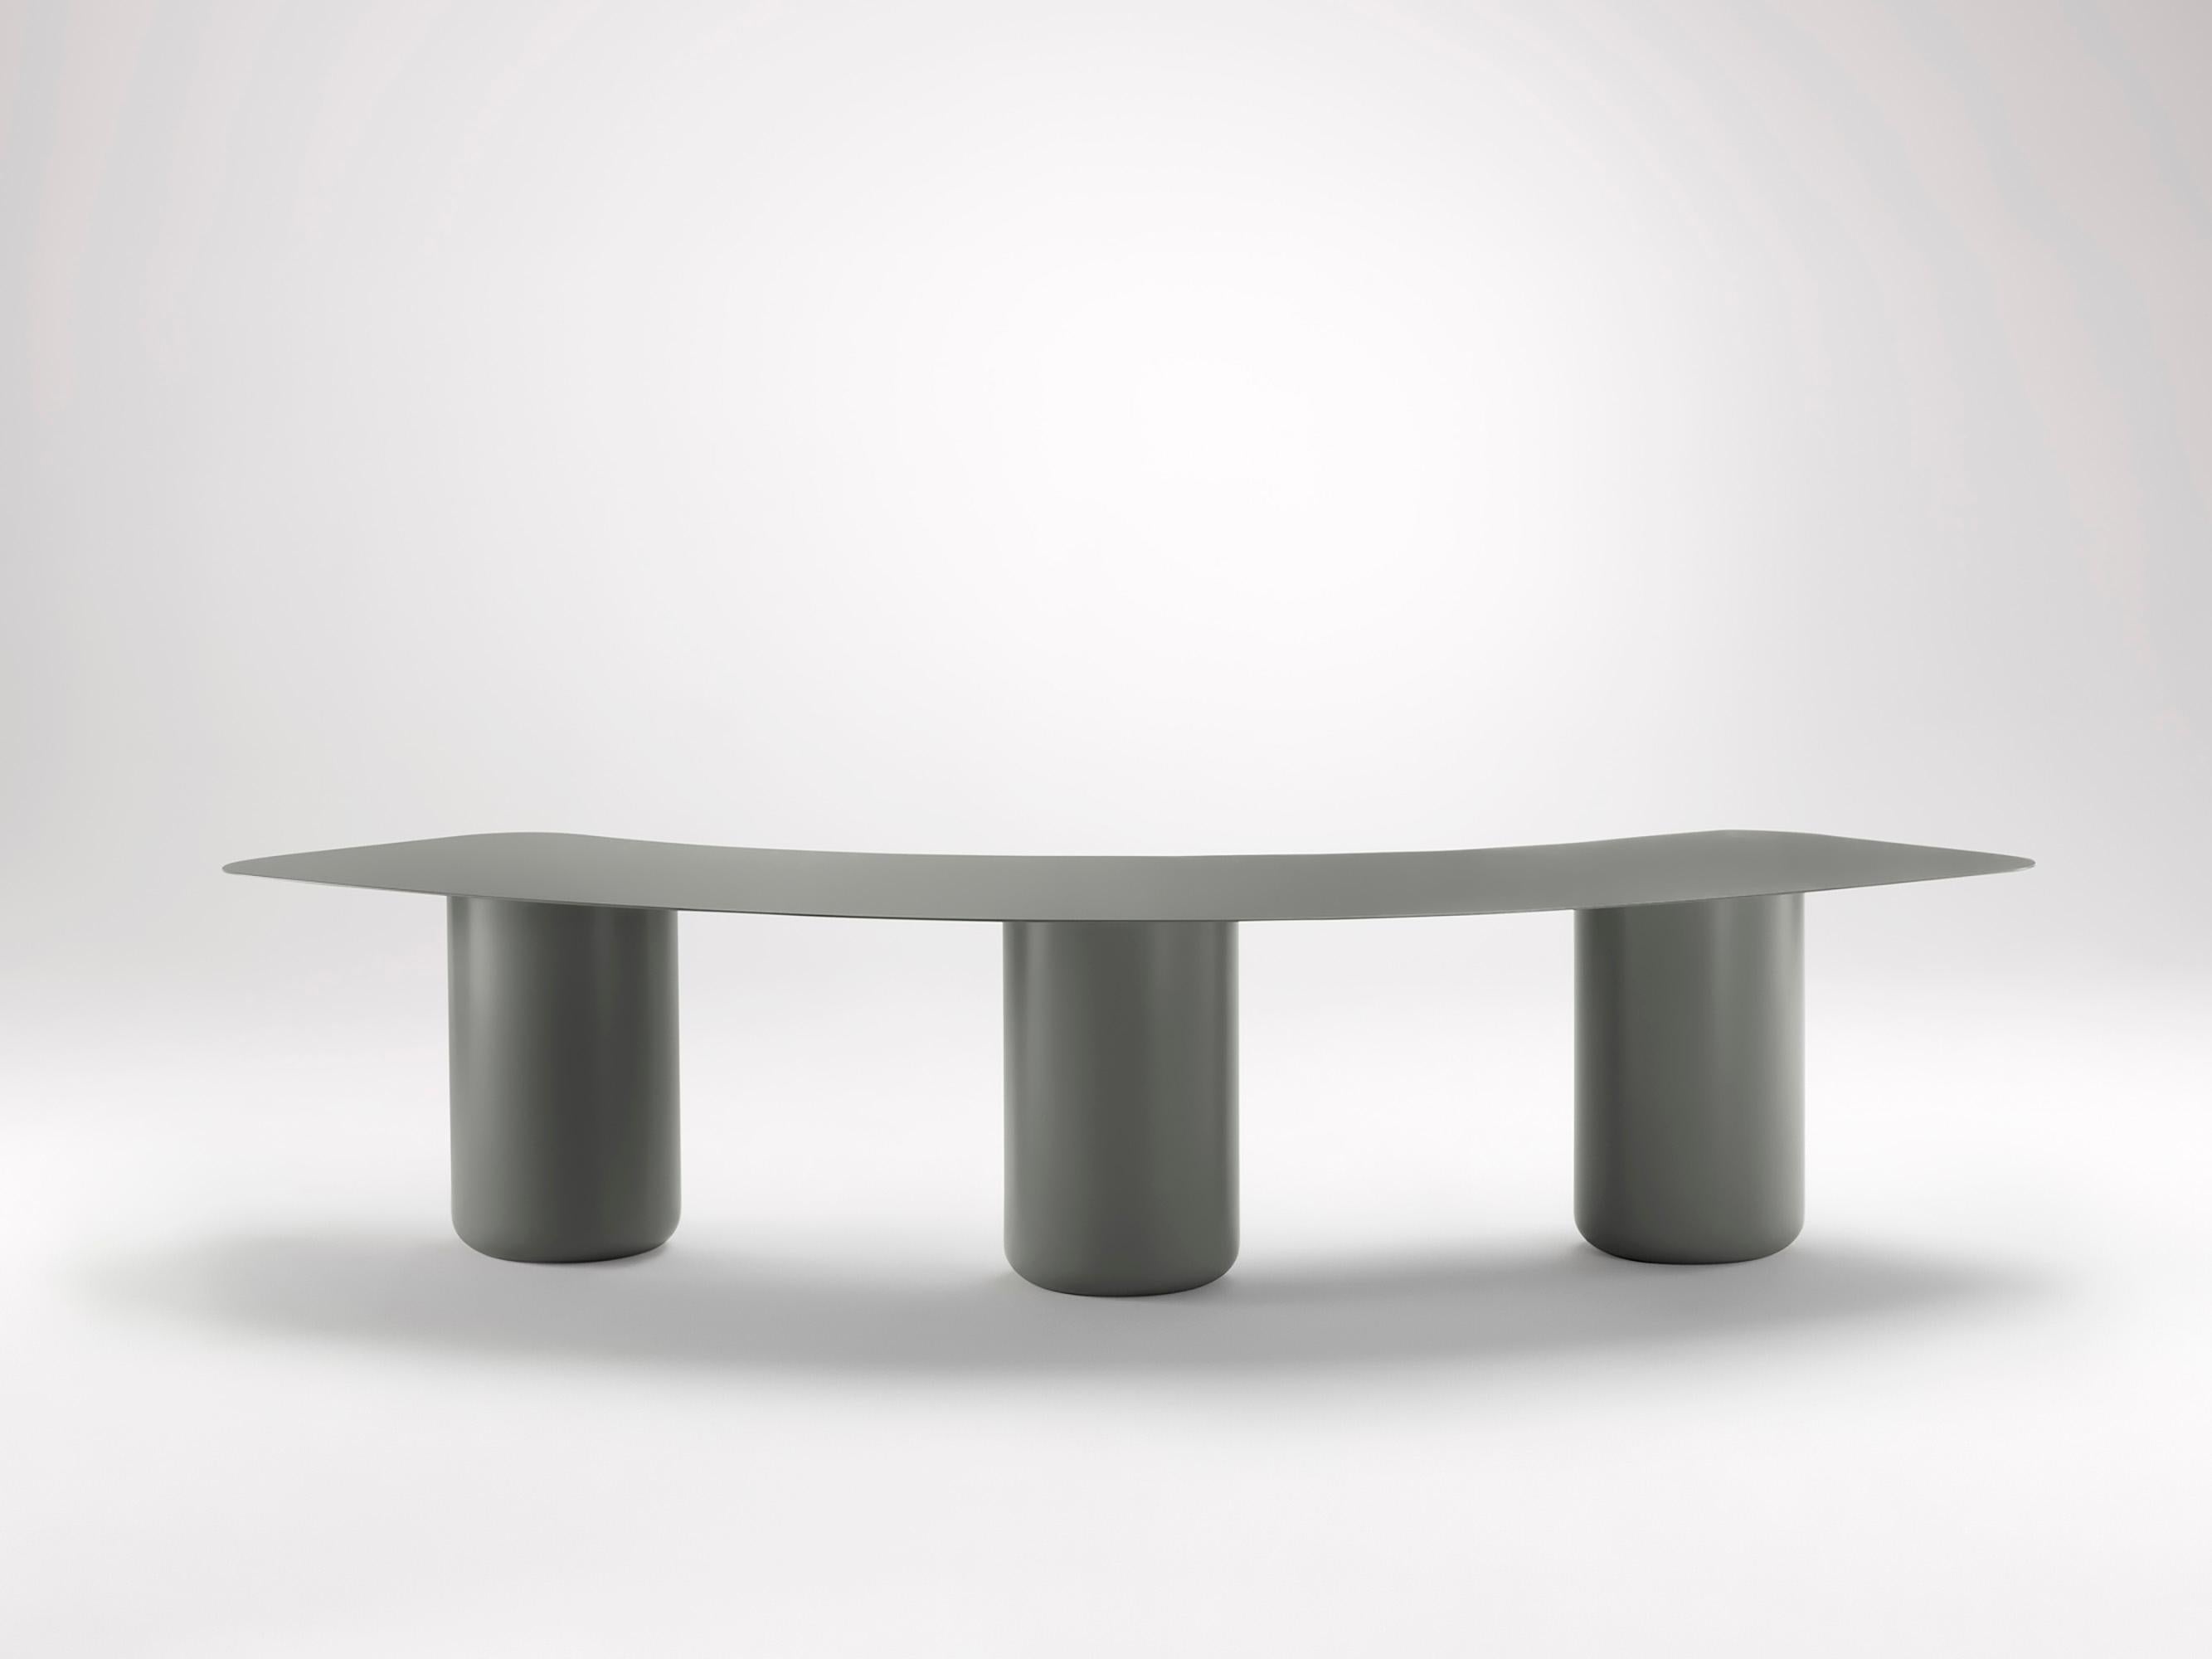 Small Woodland Grey Curved Bench by Coco Flip
Dimensions: D 65 x W 165 x H 42 cm
Materials: Mild steel, powder-coated with zinc undercoat. 
Weight: 42 kg

Coco Flip is a Melbourne based furniture and lighting design studio, run by us, Kate Stokes